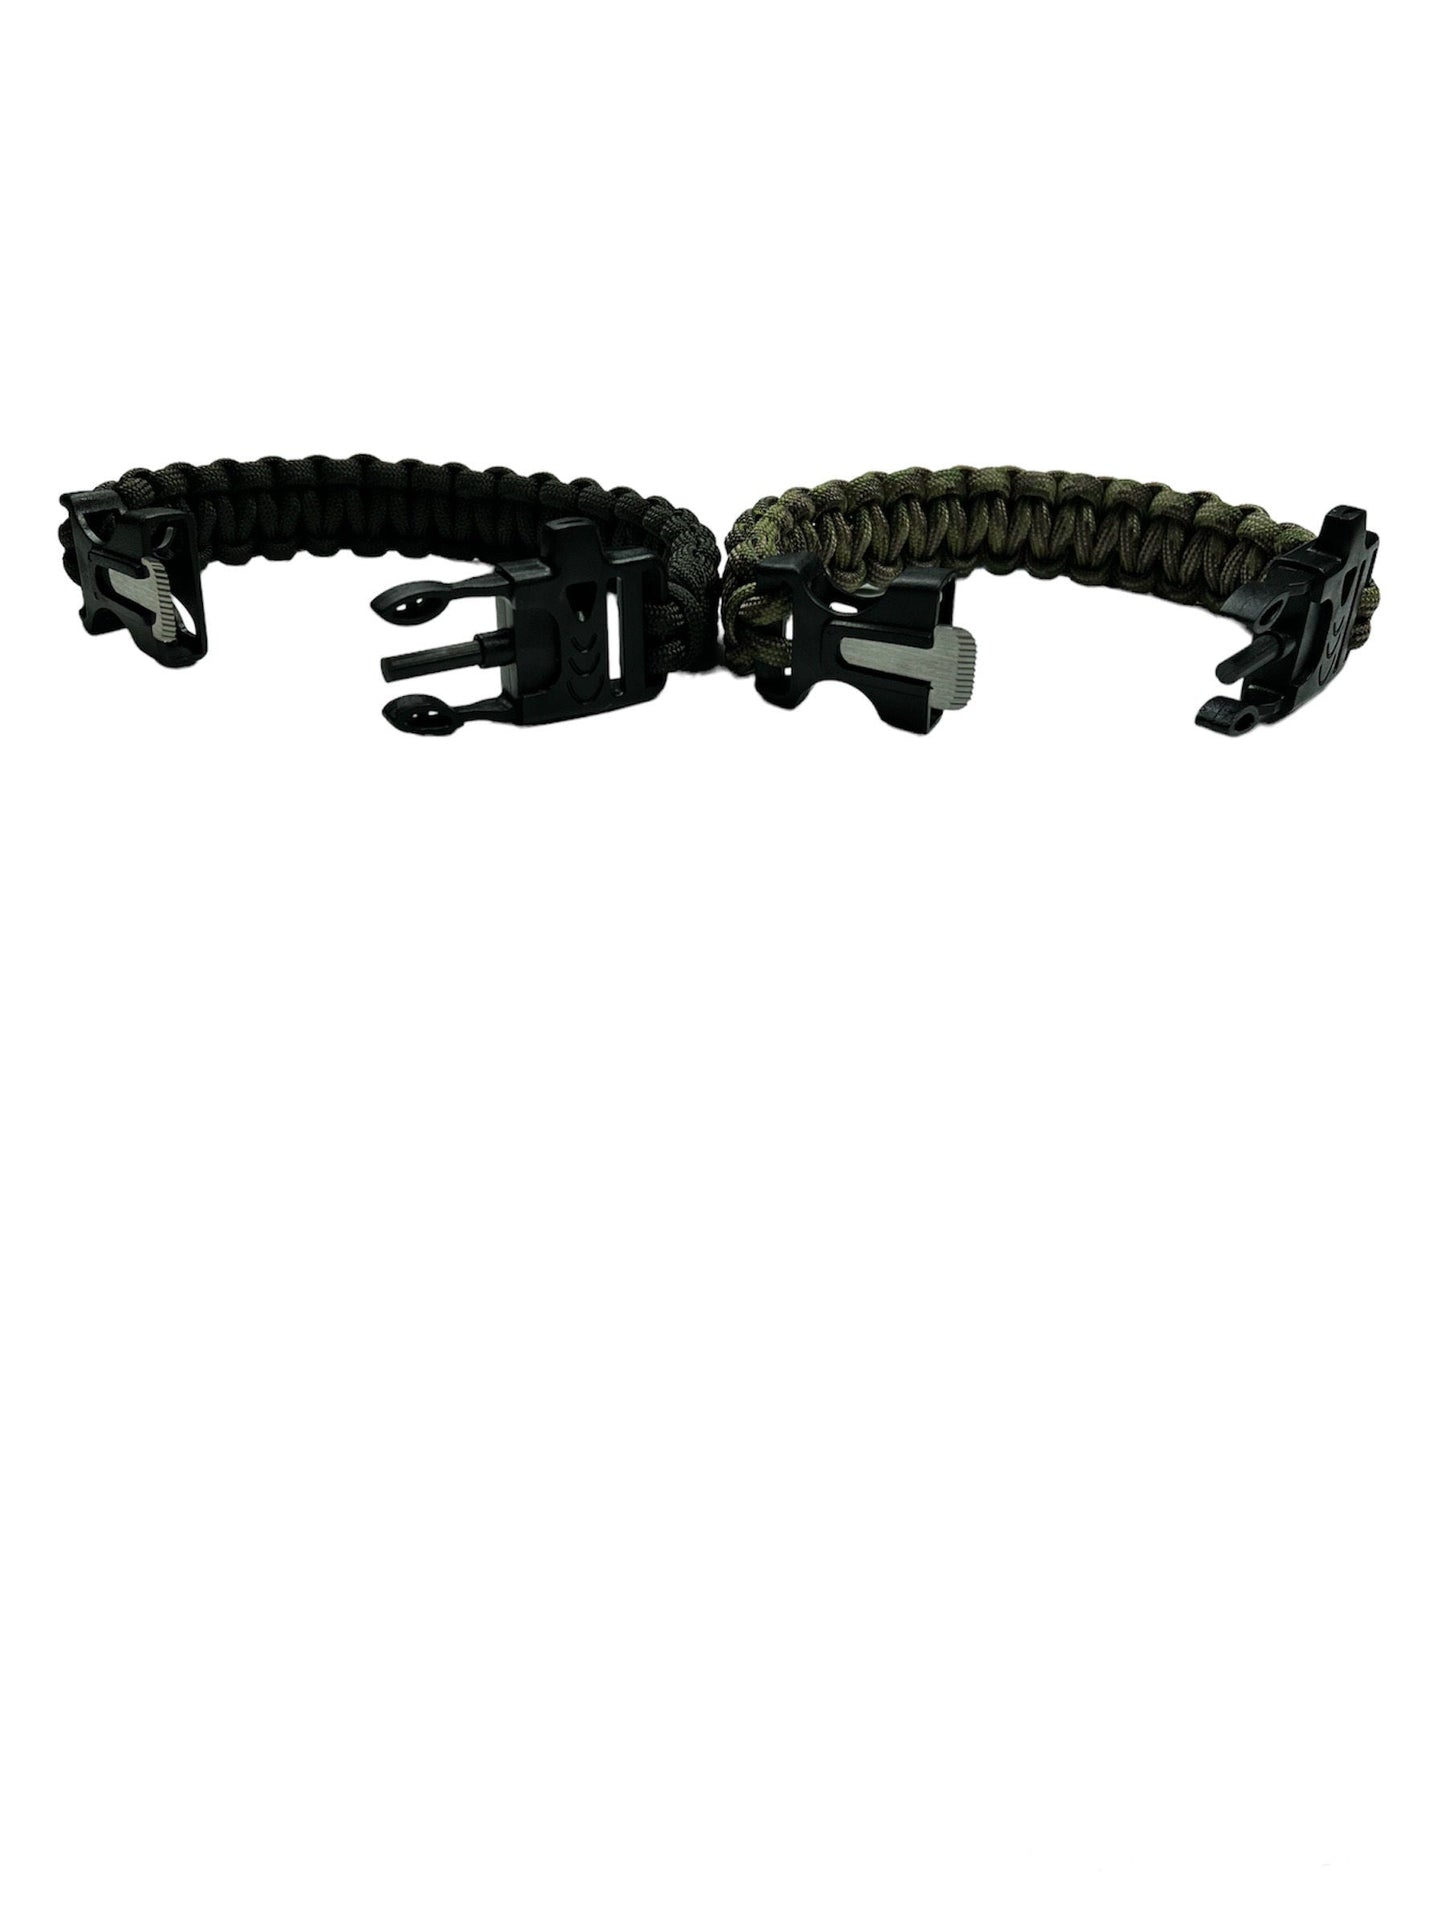 ONE Fire Starter Survival Bracelet: Ferro Rod Buckle w/Whistle. Fish ~ fire line Paracord Ages 18+. Adults only. Digital Camo, Orange, OR Drab Green. Multiple Variation Listing.